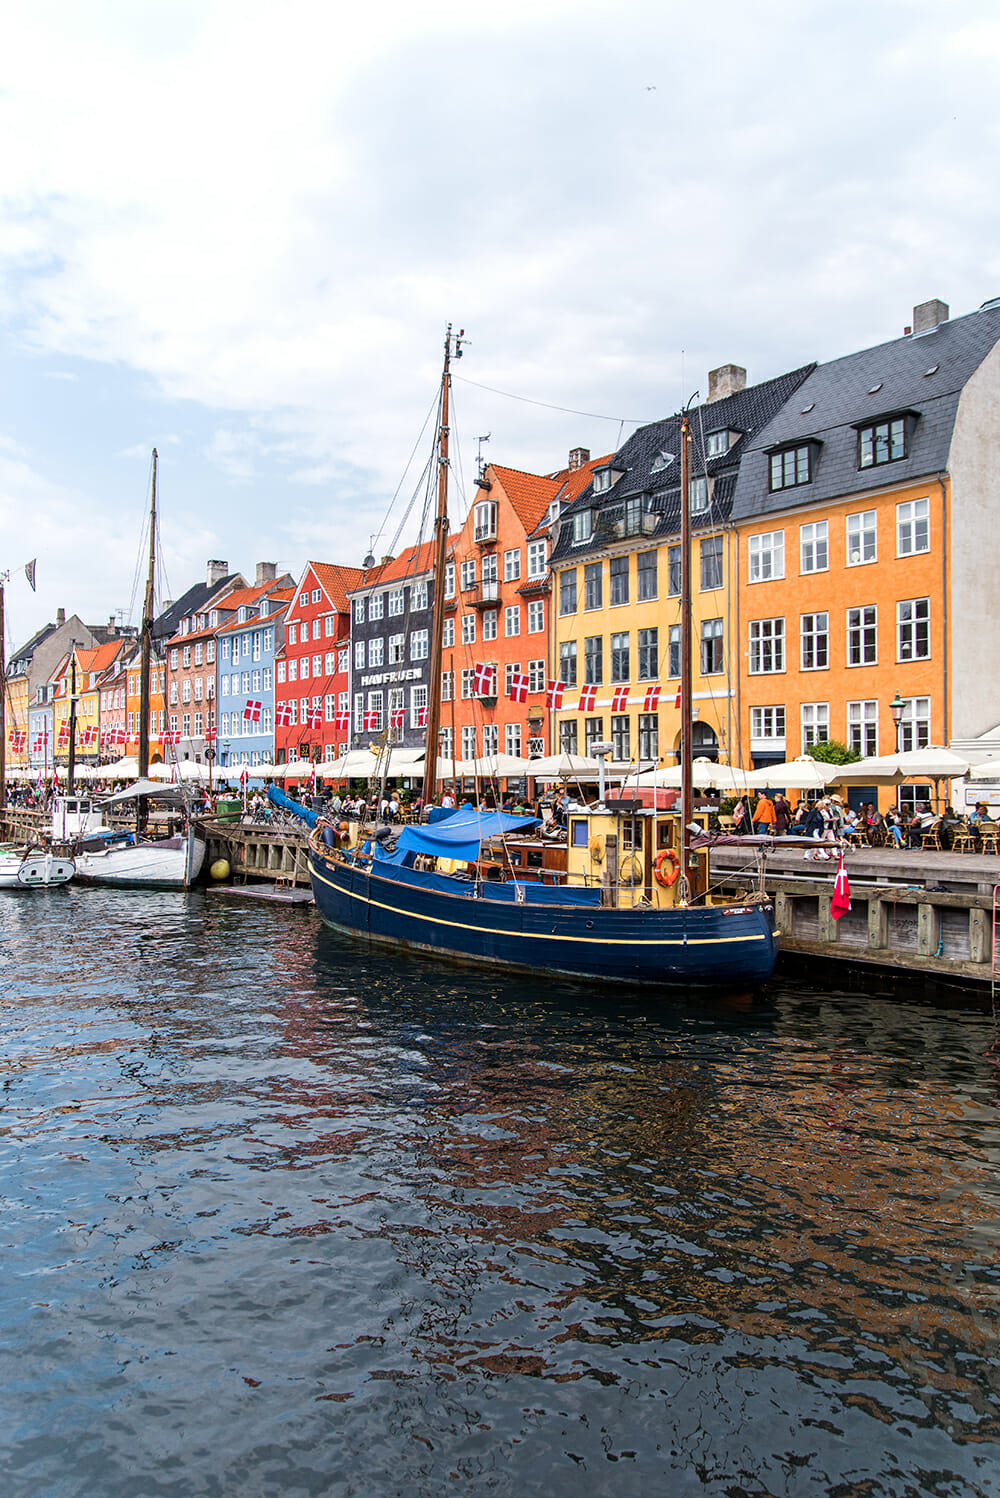 Visiting Nyhavn Like a Local: The Colorful Canal of Copenhagen